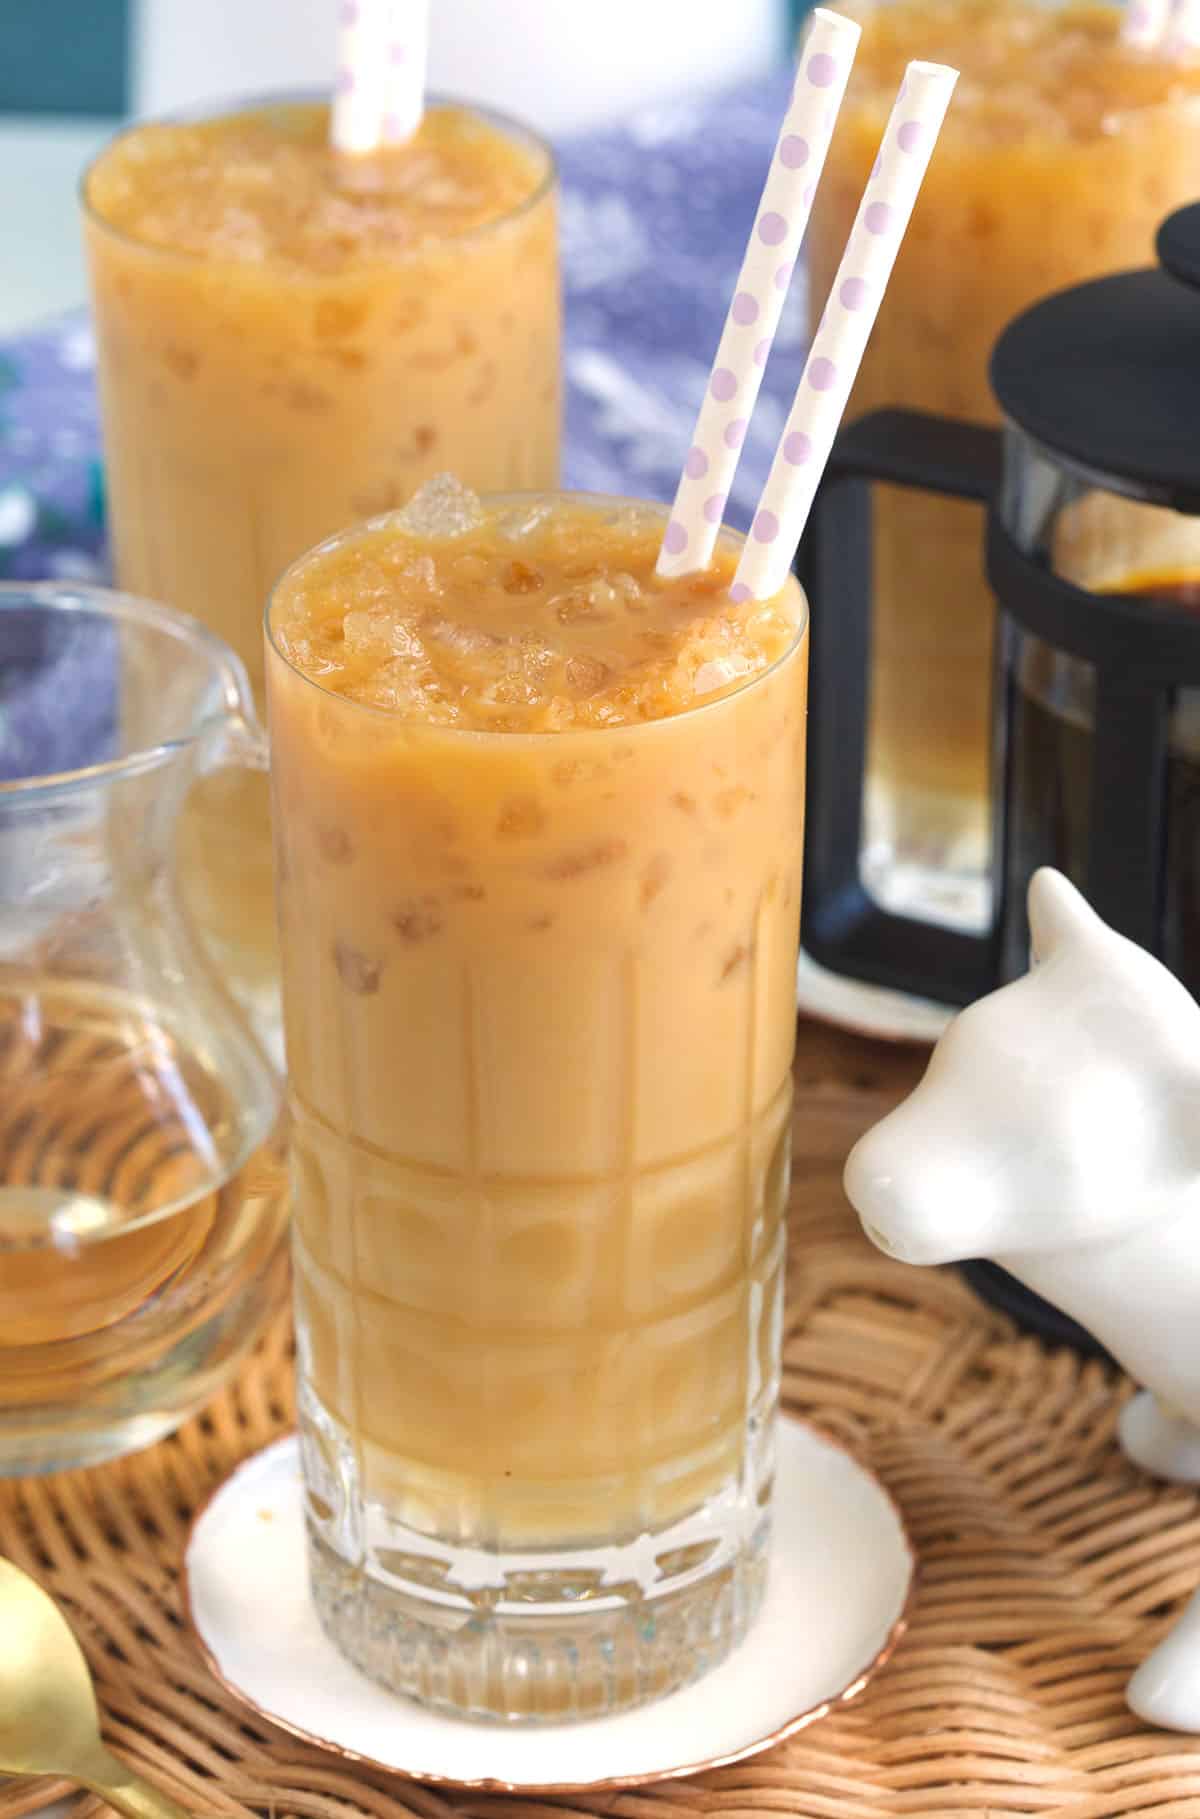 Two straws are placed in a glass cup filled with iced latte. 